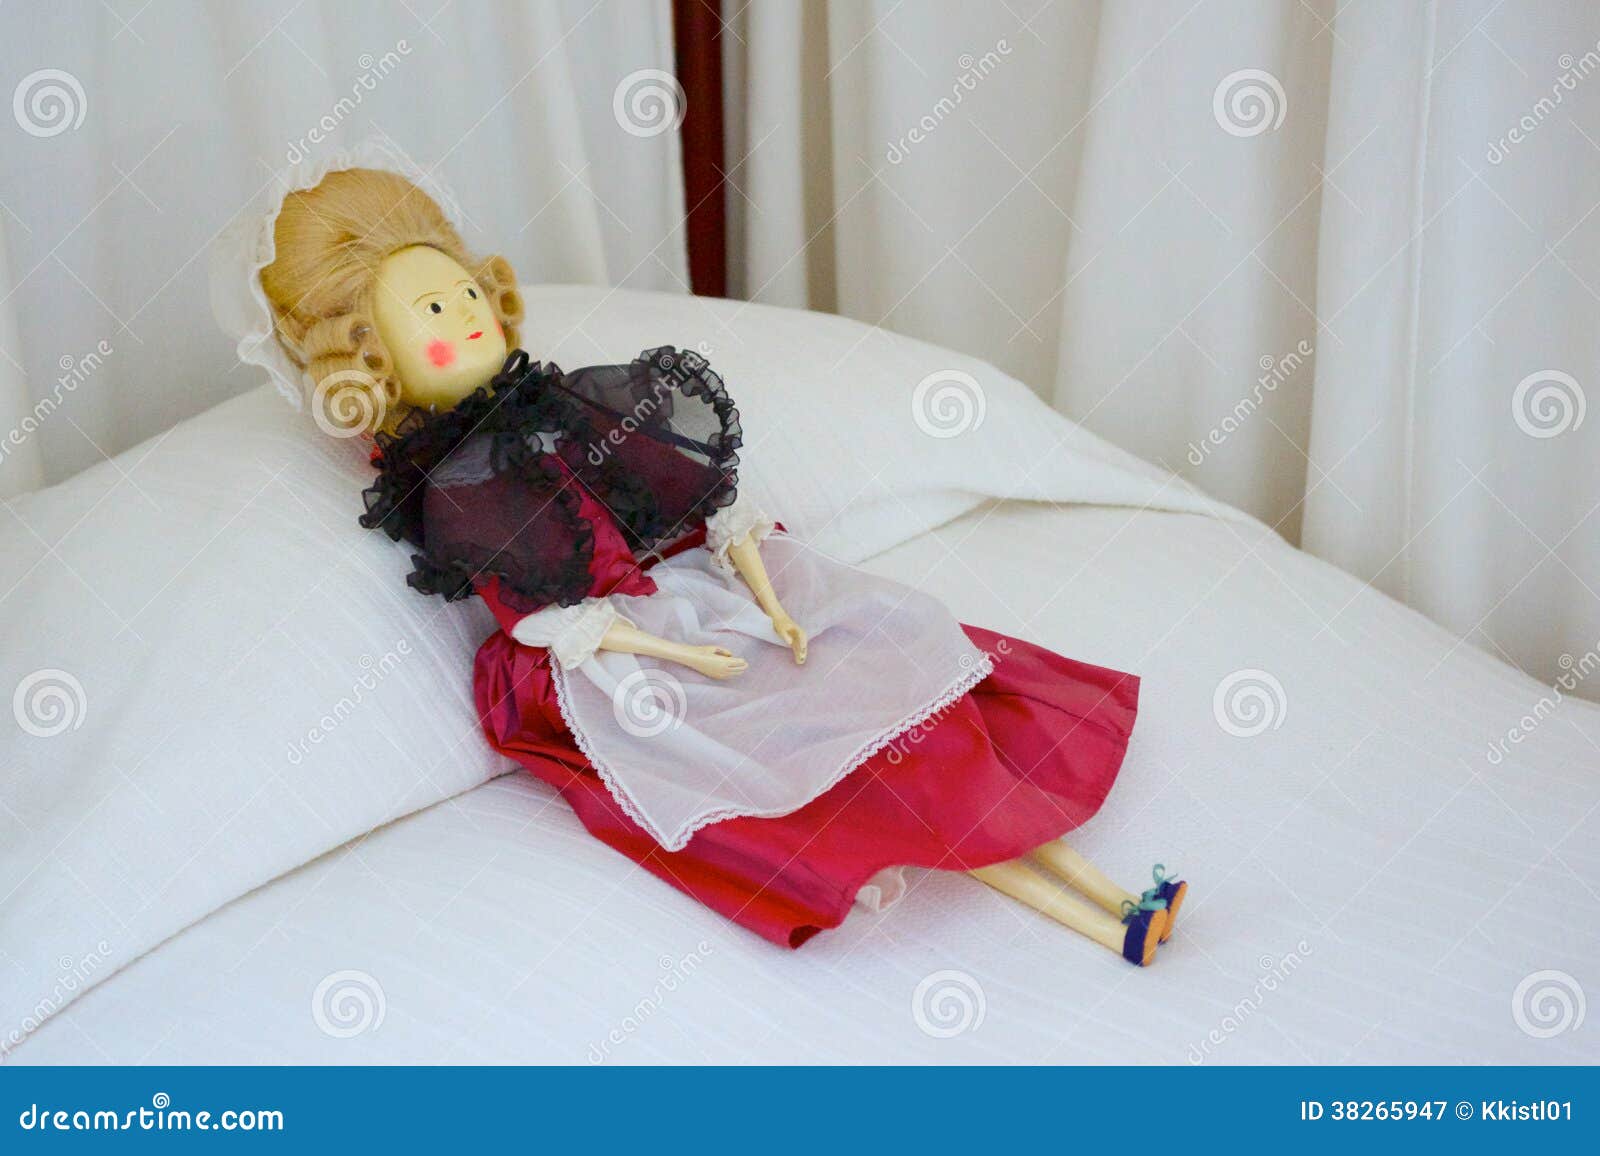 Antique Baby Doll stock image. Image of lace, girls, girl - 38265947